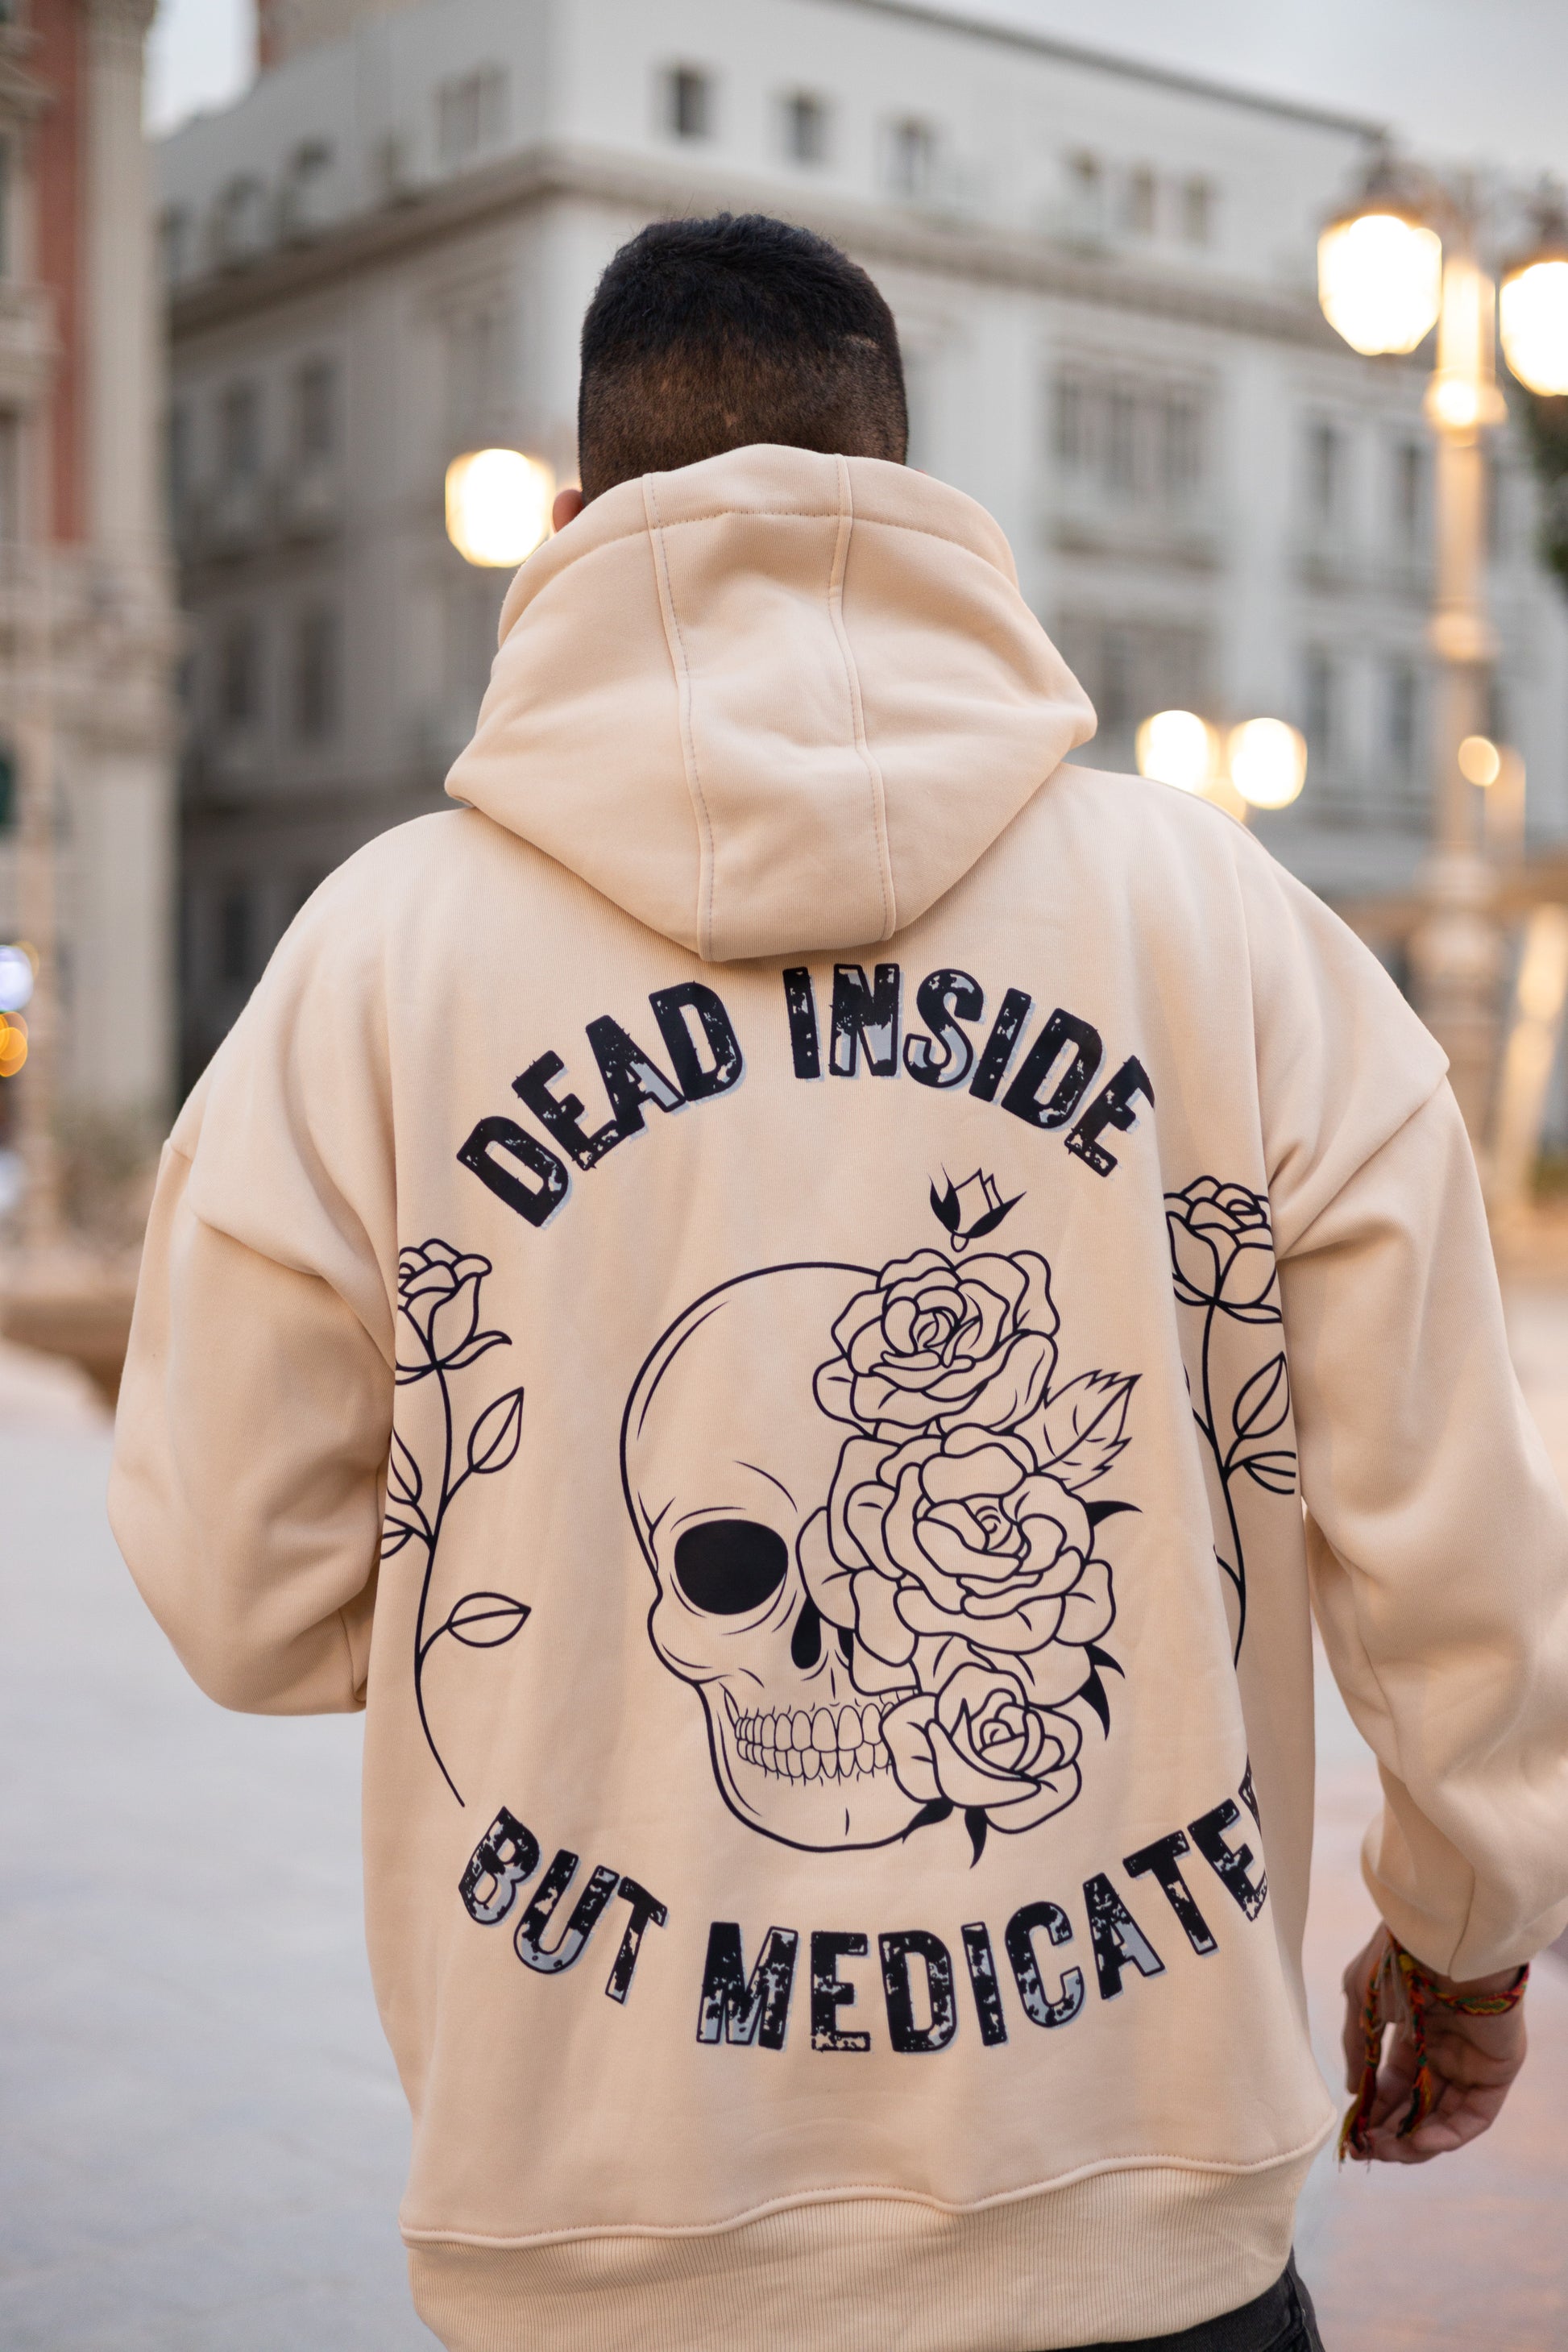 Beige oversized hoodie playing with light and darkness by blending lively roses and creepy skulls balanced with "Dead Inside But Medicated" back caption.